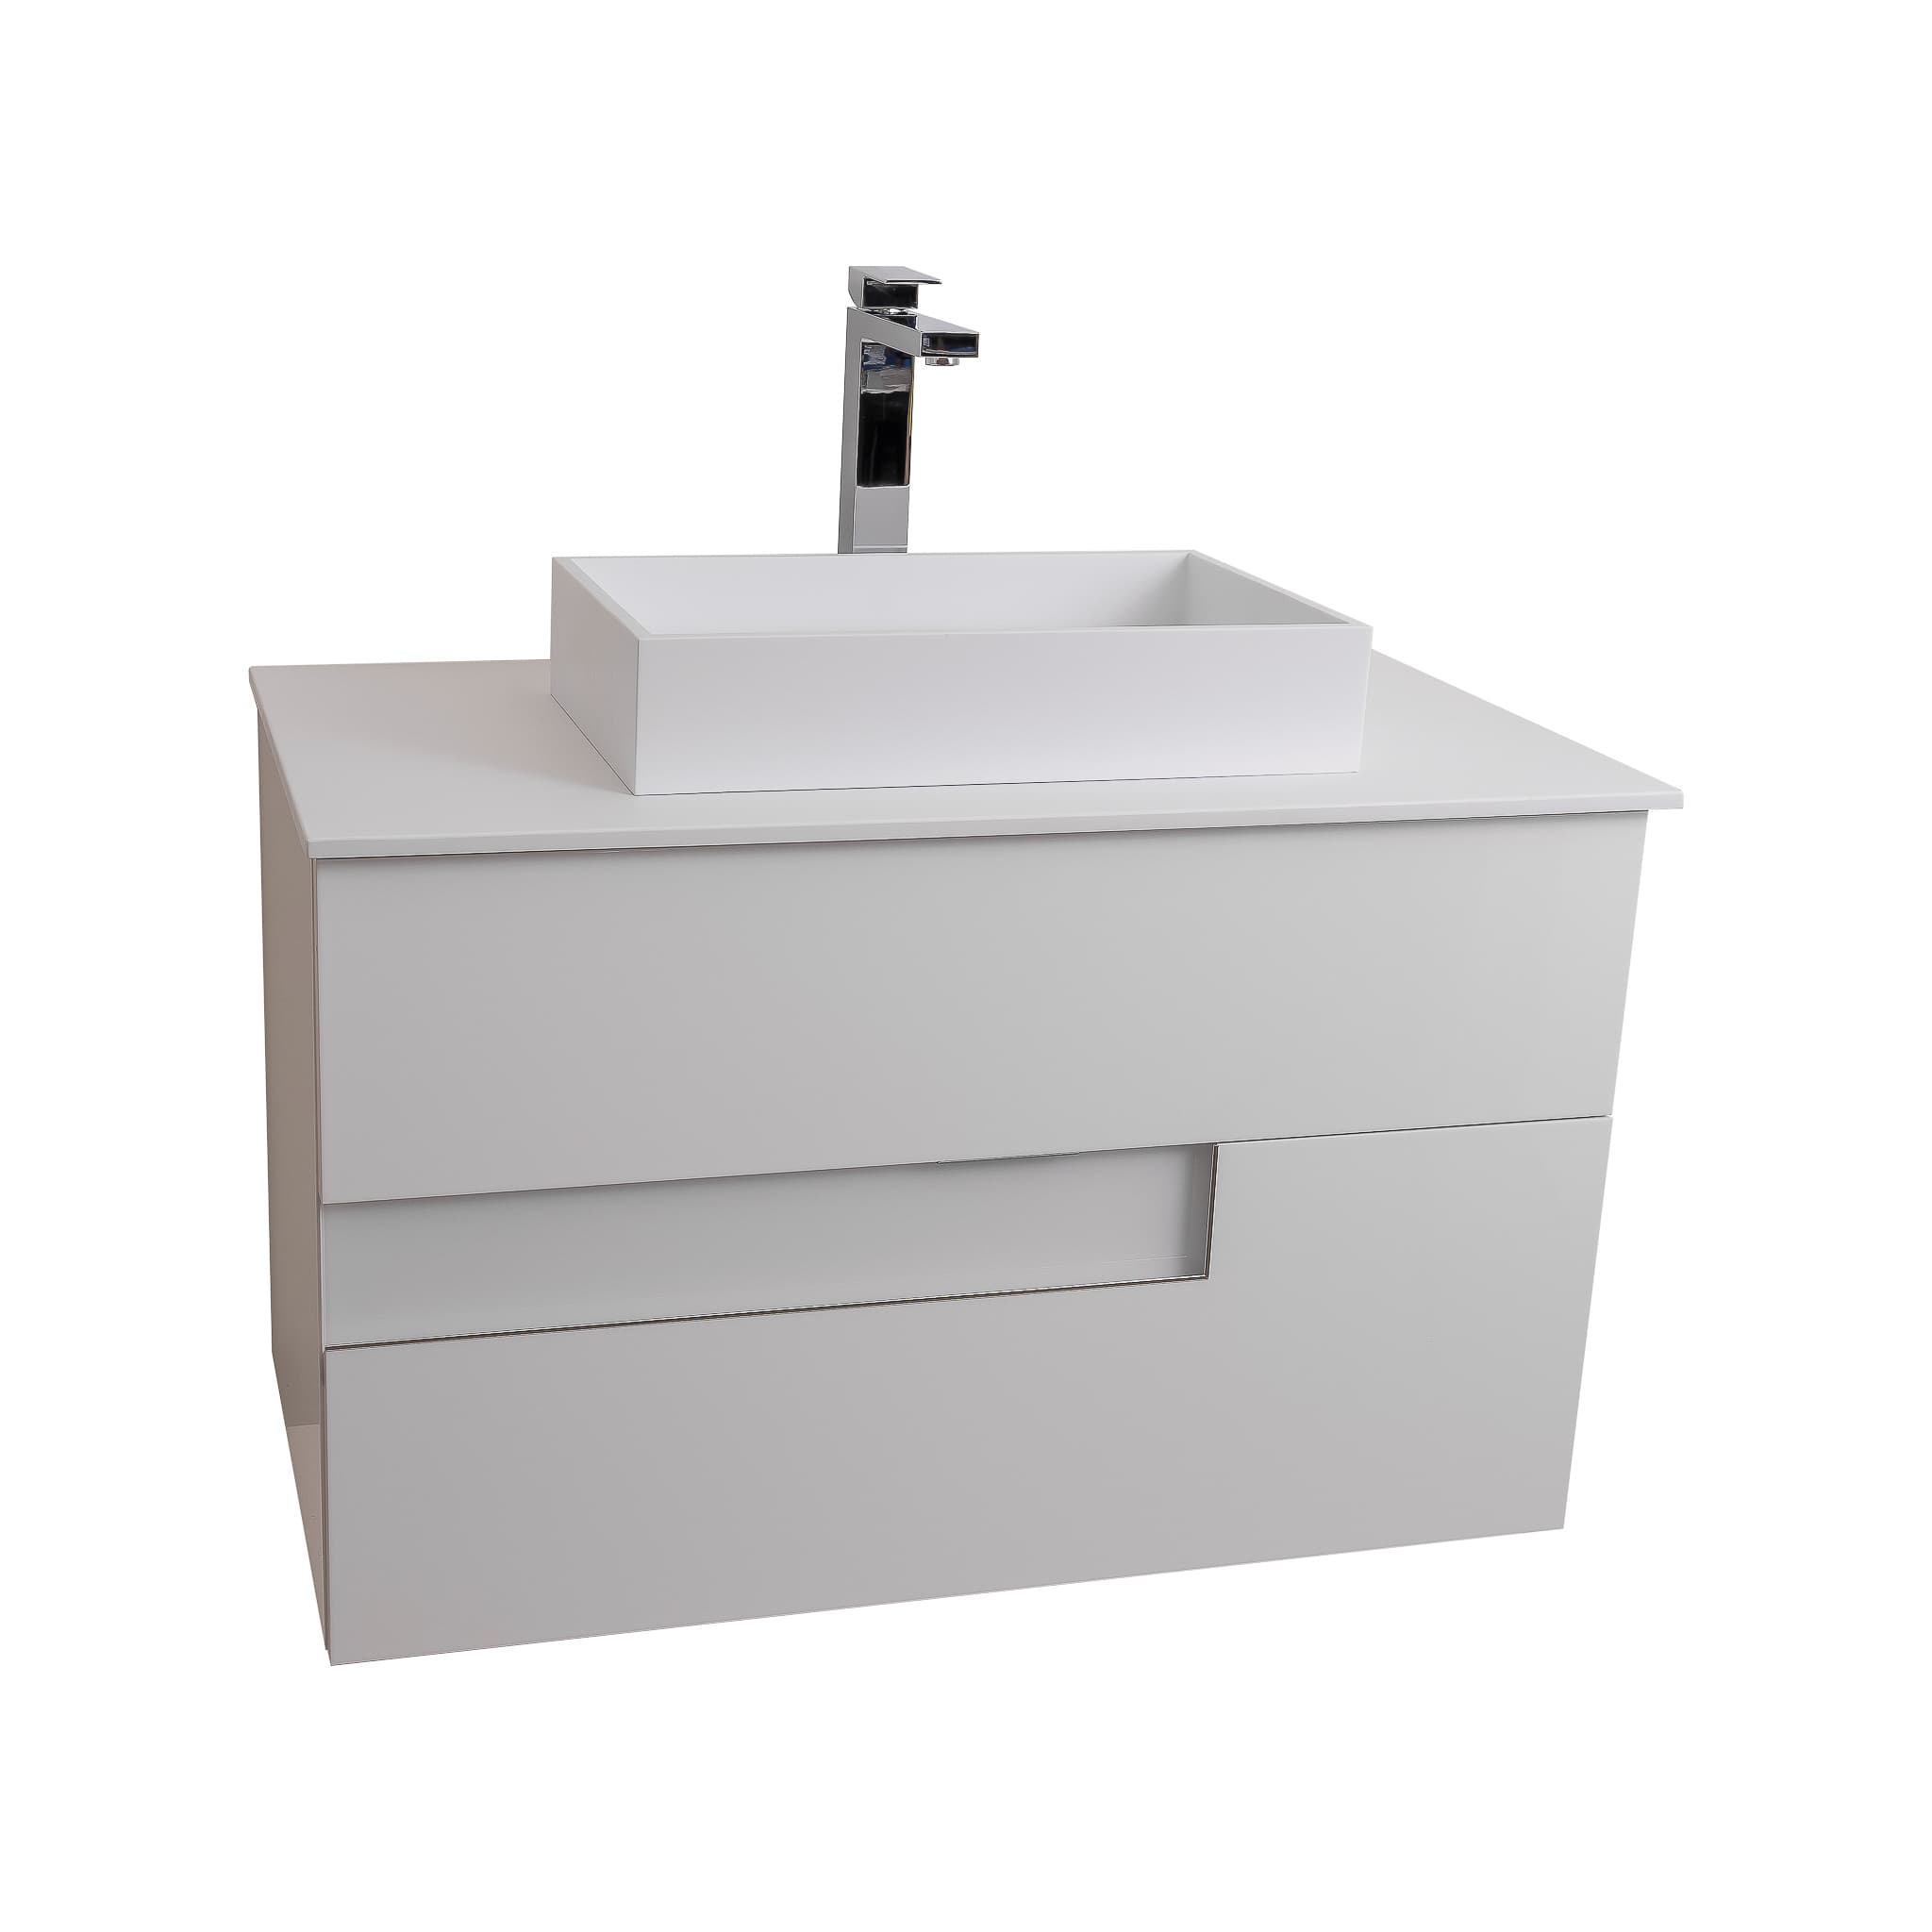 Vision 39.5 White High Gloss Cabinet, Solid Surface Flat White Counter And Infinity Square Solid Surface White Basin 1329, Wall Mounted Modern Vanity Set